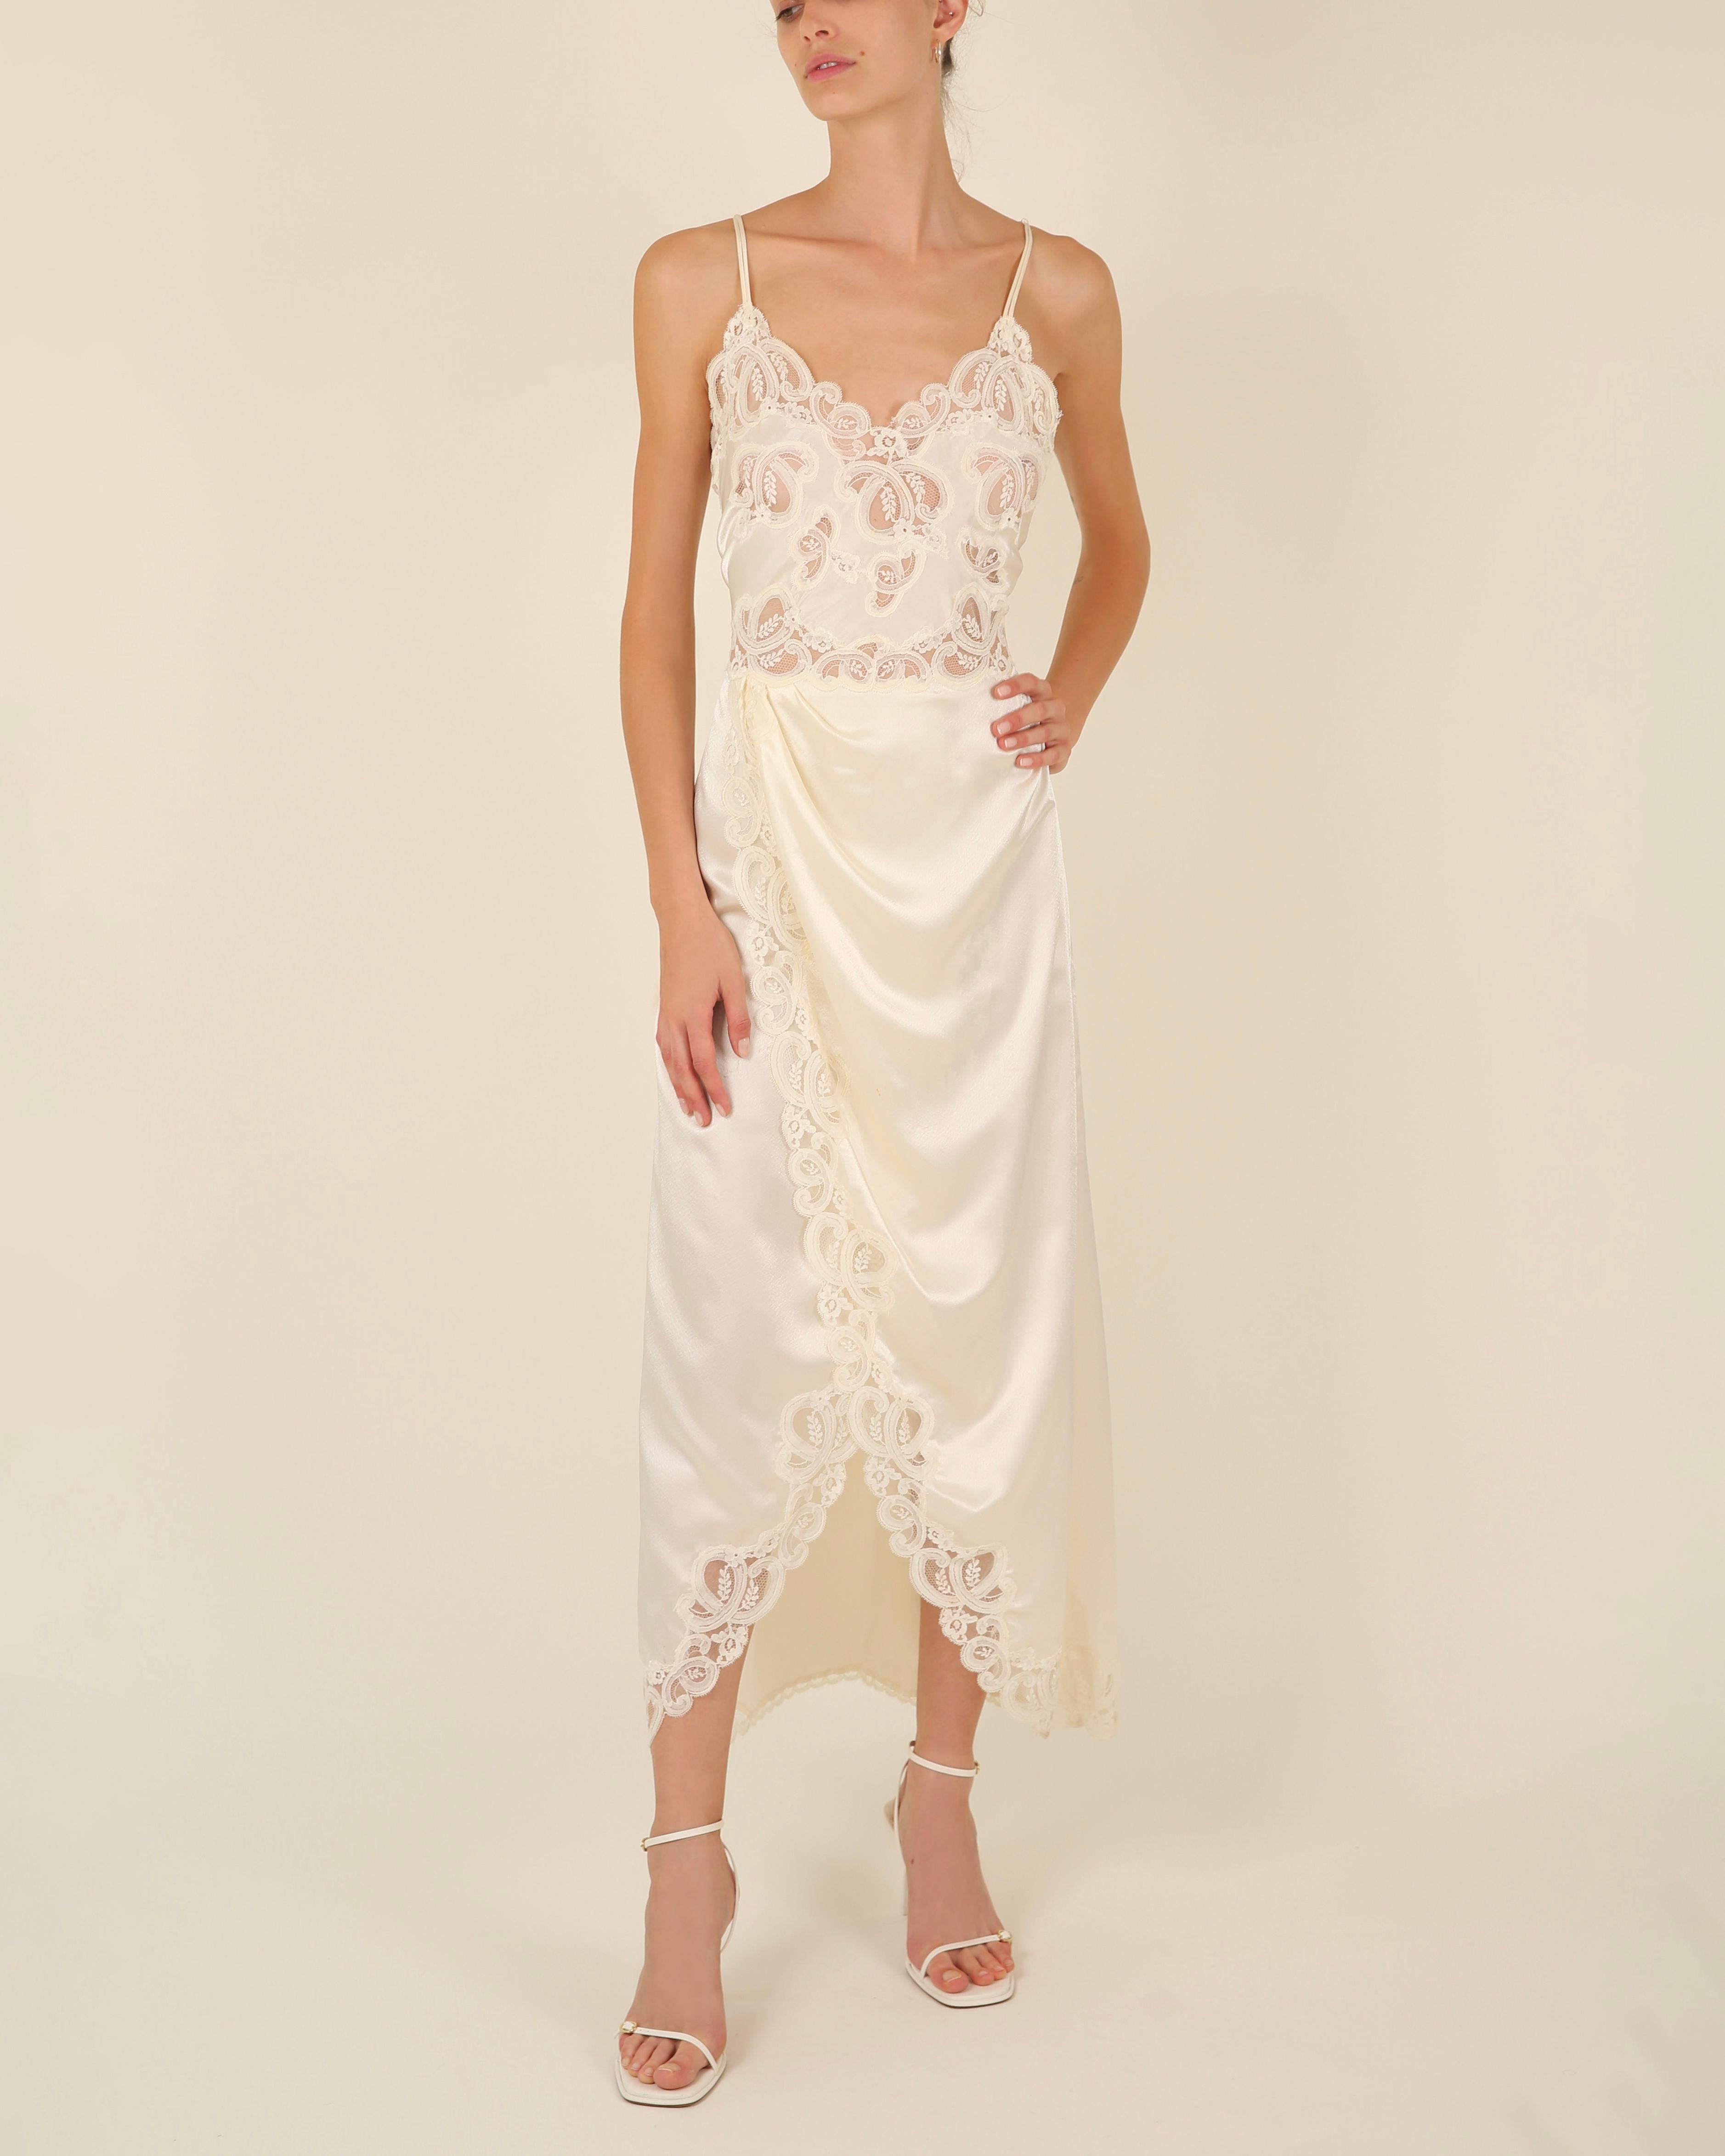 Eve Stillman Couture vintage lace night gown in silk. I would guess this to be from the 70's. It would work just beautifully for a wedding or worn in an evening
Ivory / cream
Spaghetti straps
Lace trim
Beautiful cross over skirt creates a beautiful